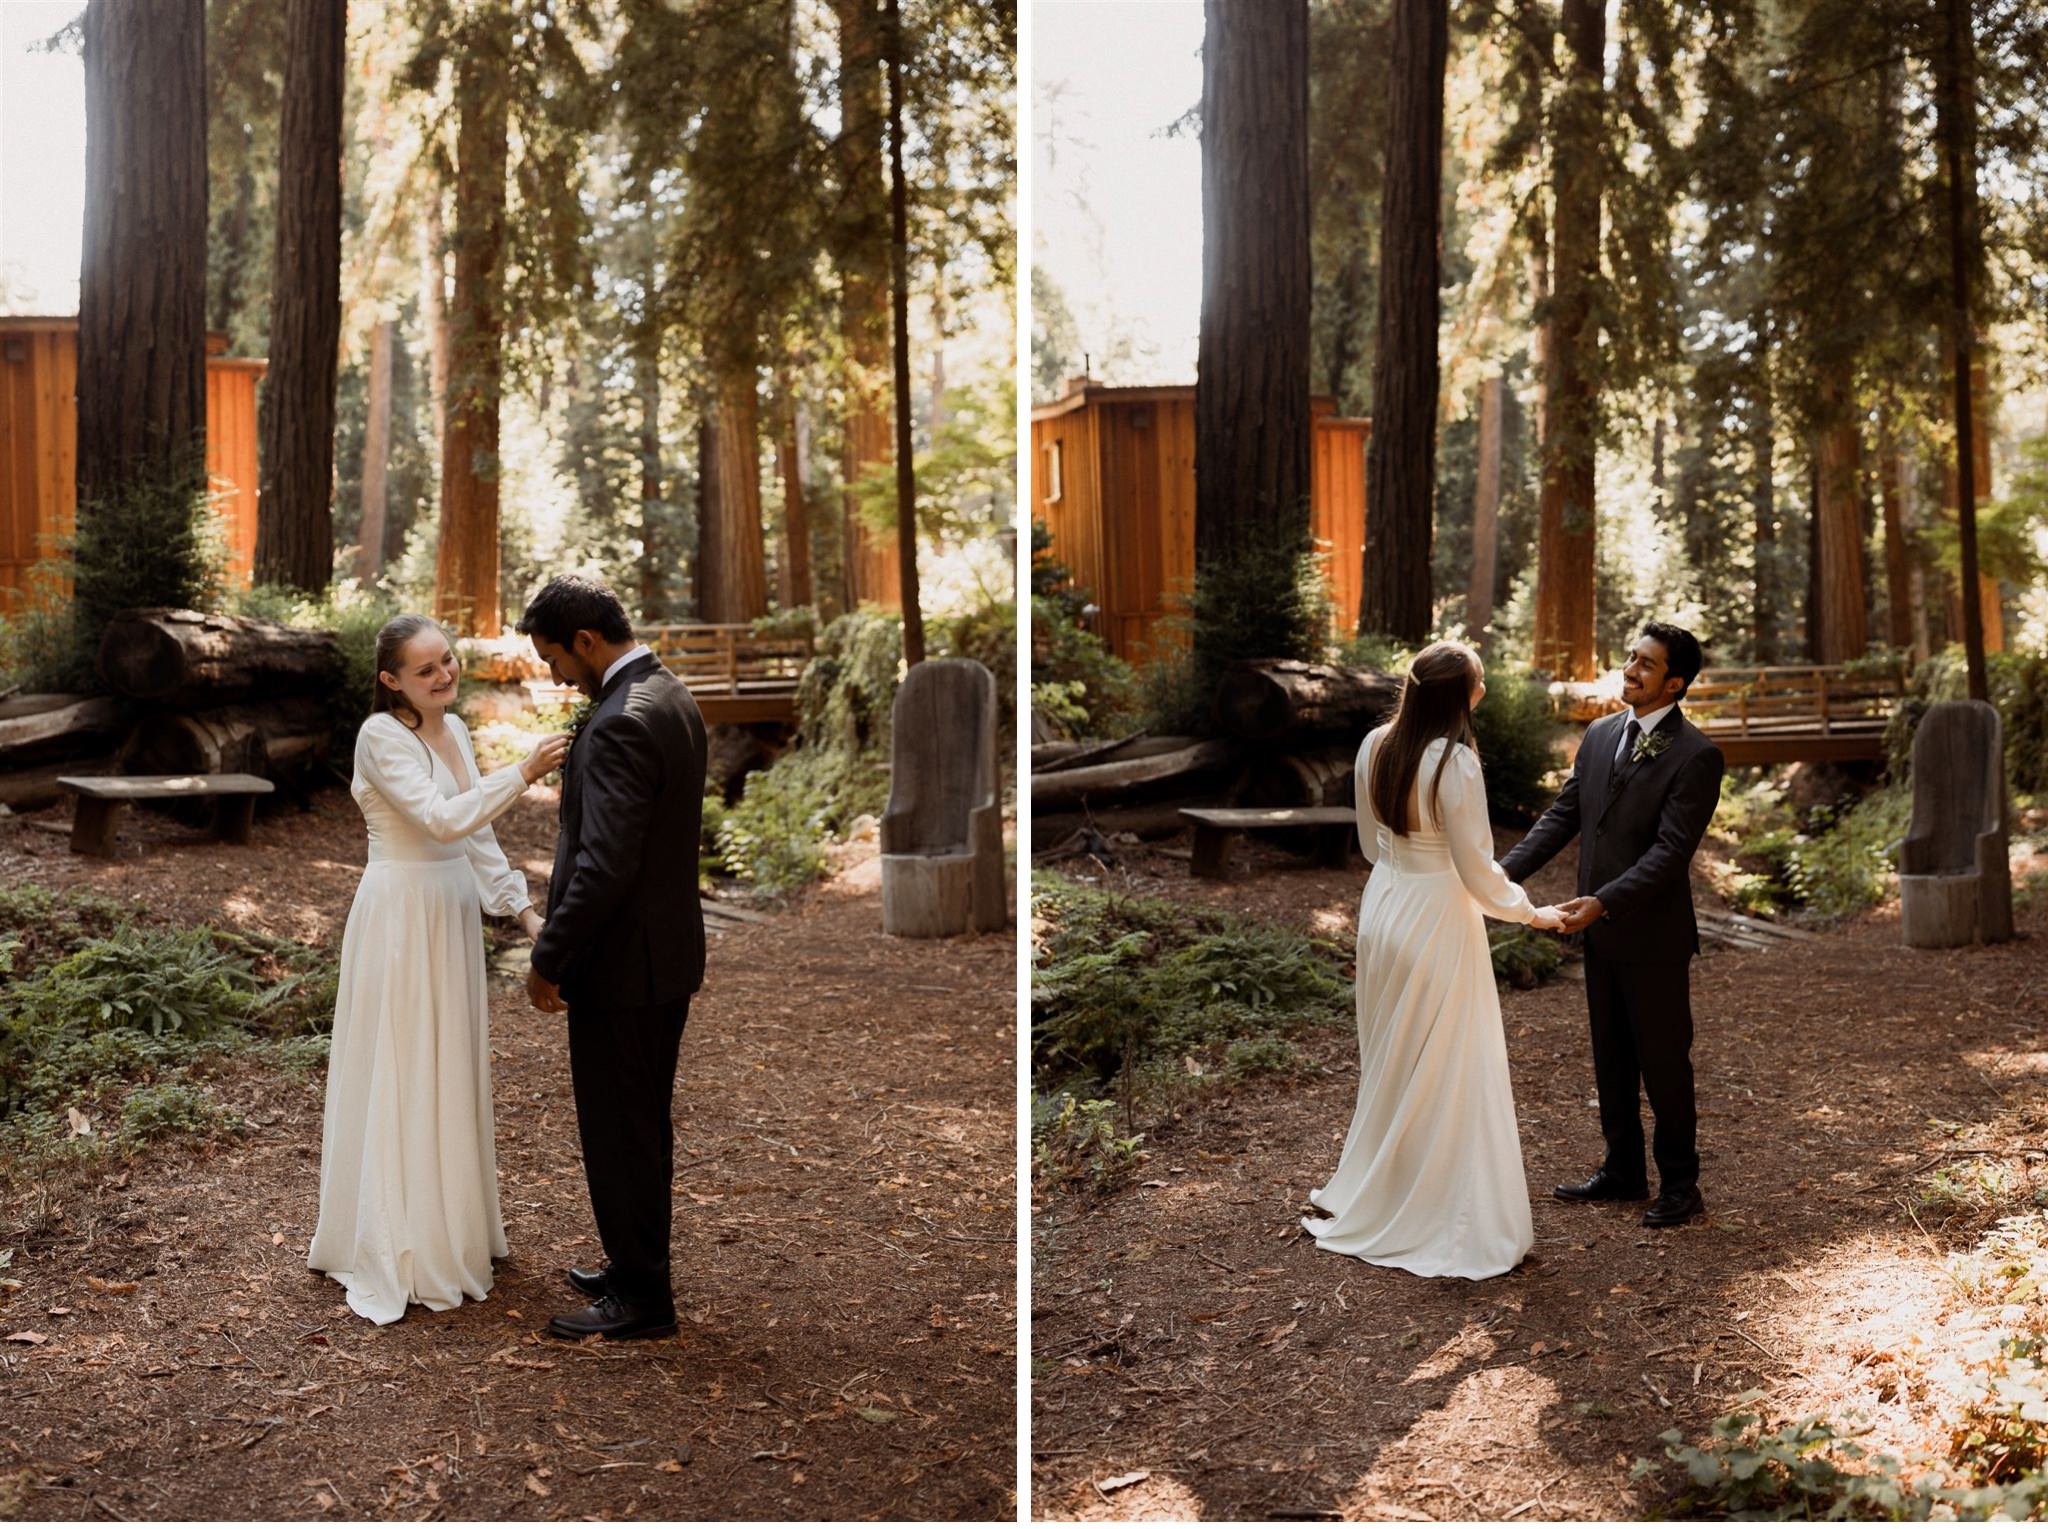 023_Two-Day Big Sur Redwoods Elopement with Family_Will Khoury Elopement Photographer.jpg